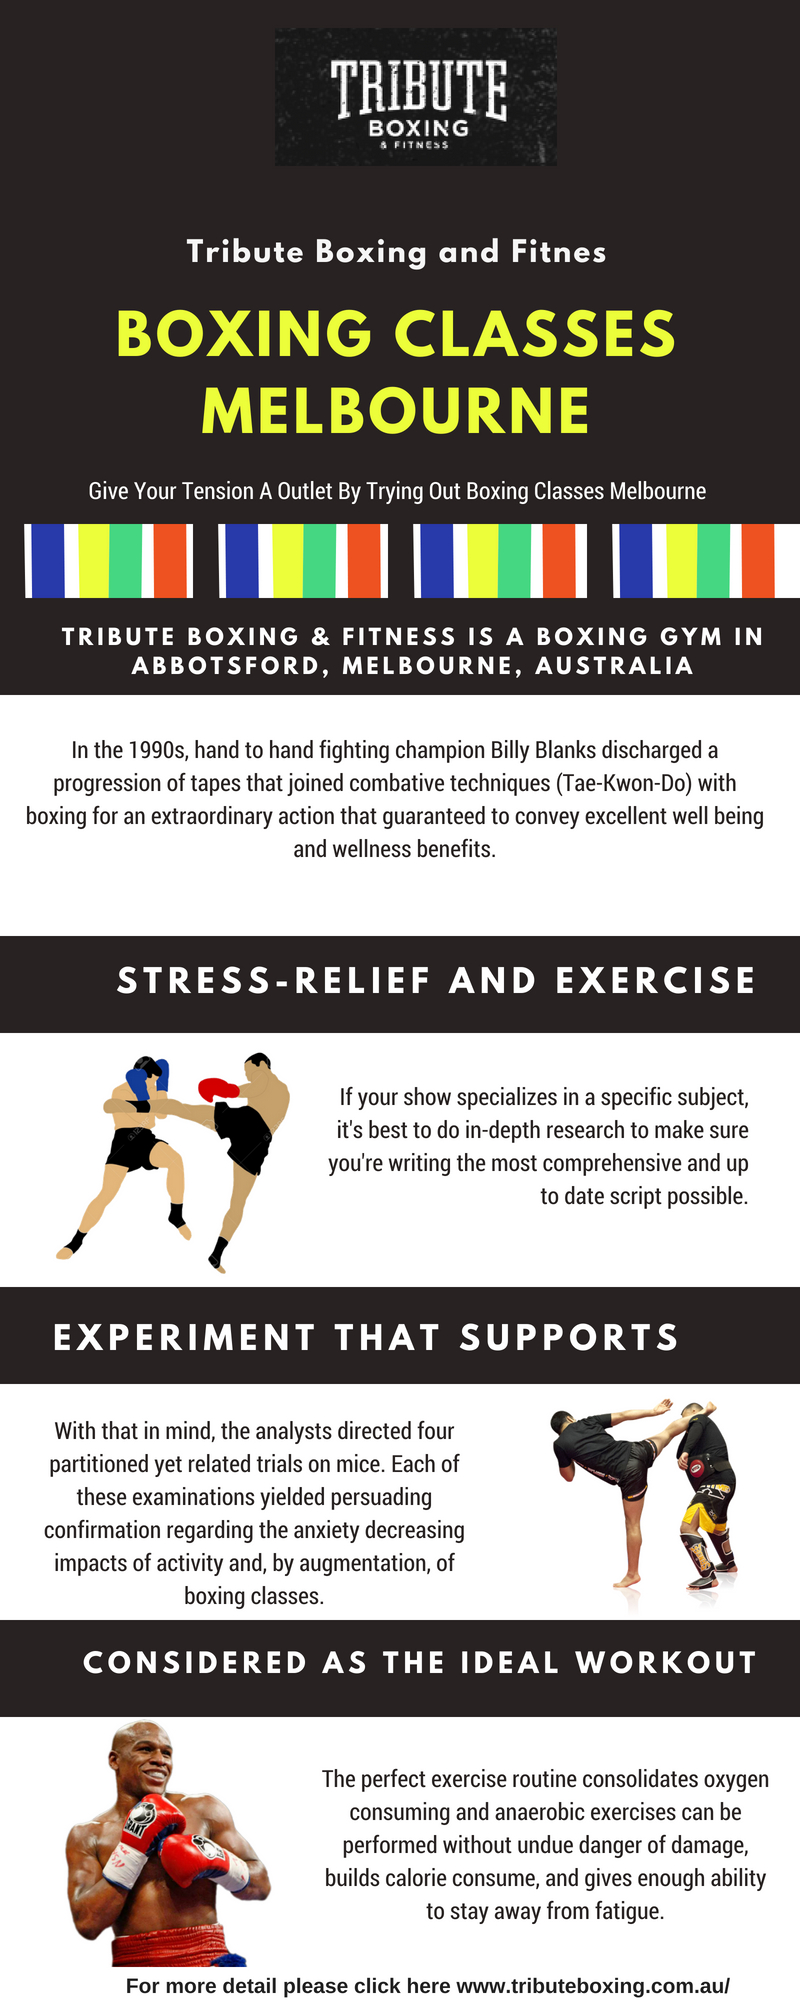 Give Your Tension A Outlet By Trying Out Boxing Classes Melbourne.jpg Tribute Boxing & Fitness offers boxing training in Melbourne, Australia. We offer a diverse range of services including Tribute circuit classes http://www.tributeboxing.com.au by TributeBoxing